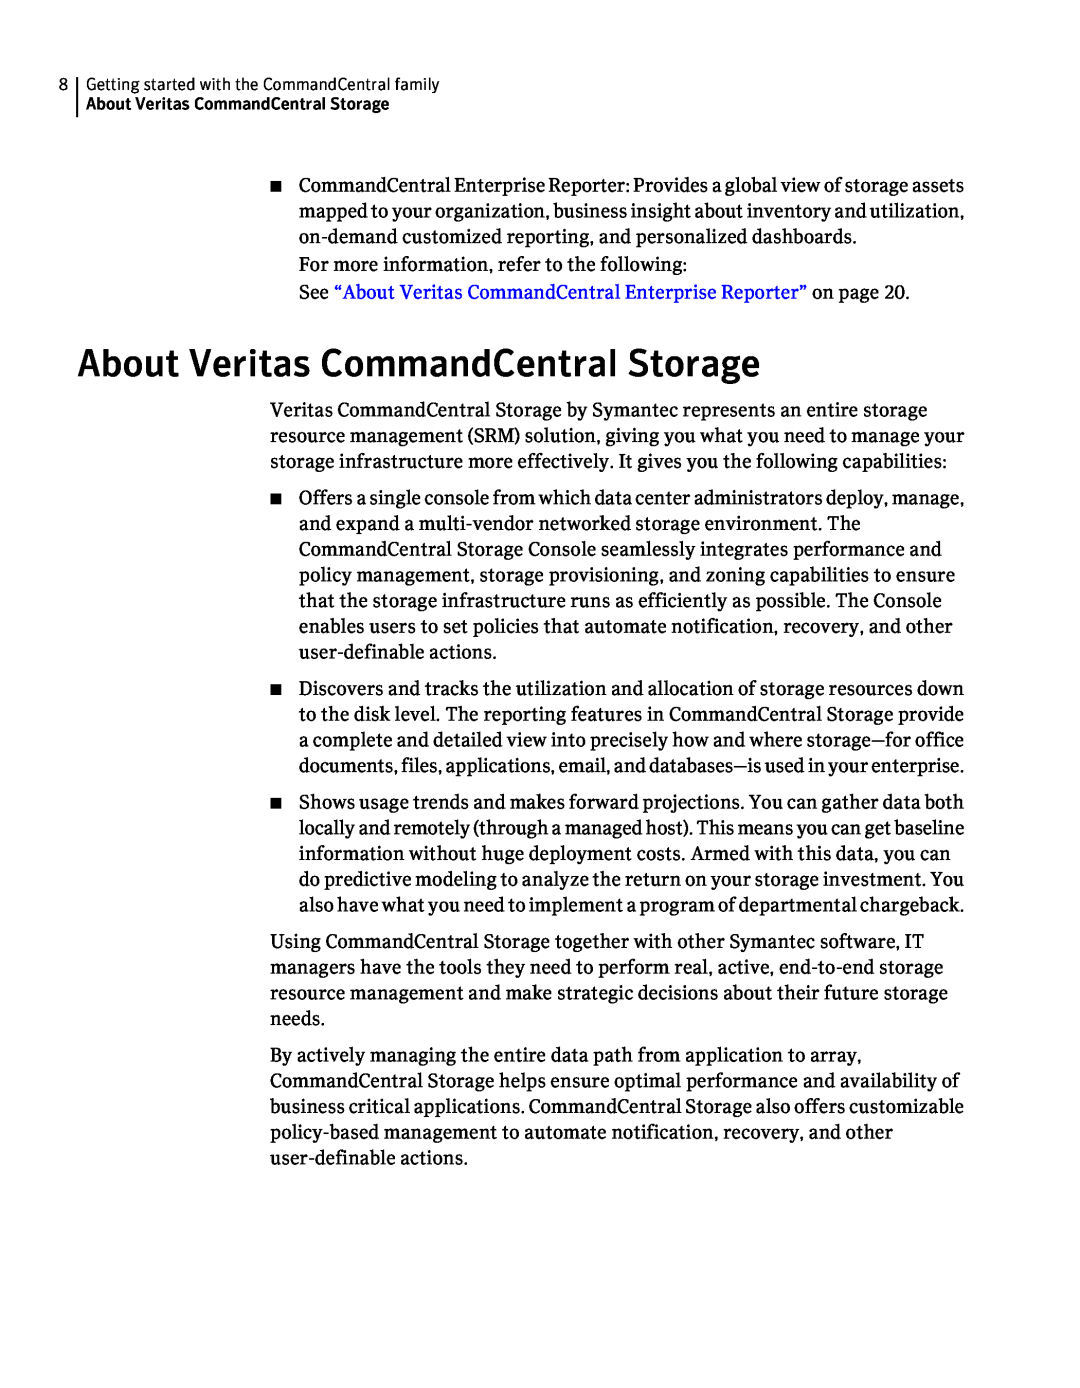 Symantec 5.1 manual About Veritas CommandCentral Storage, See “About Veritas CommandCentral Enterprise Reporter” on page 